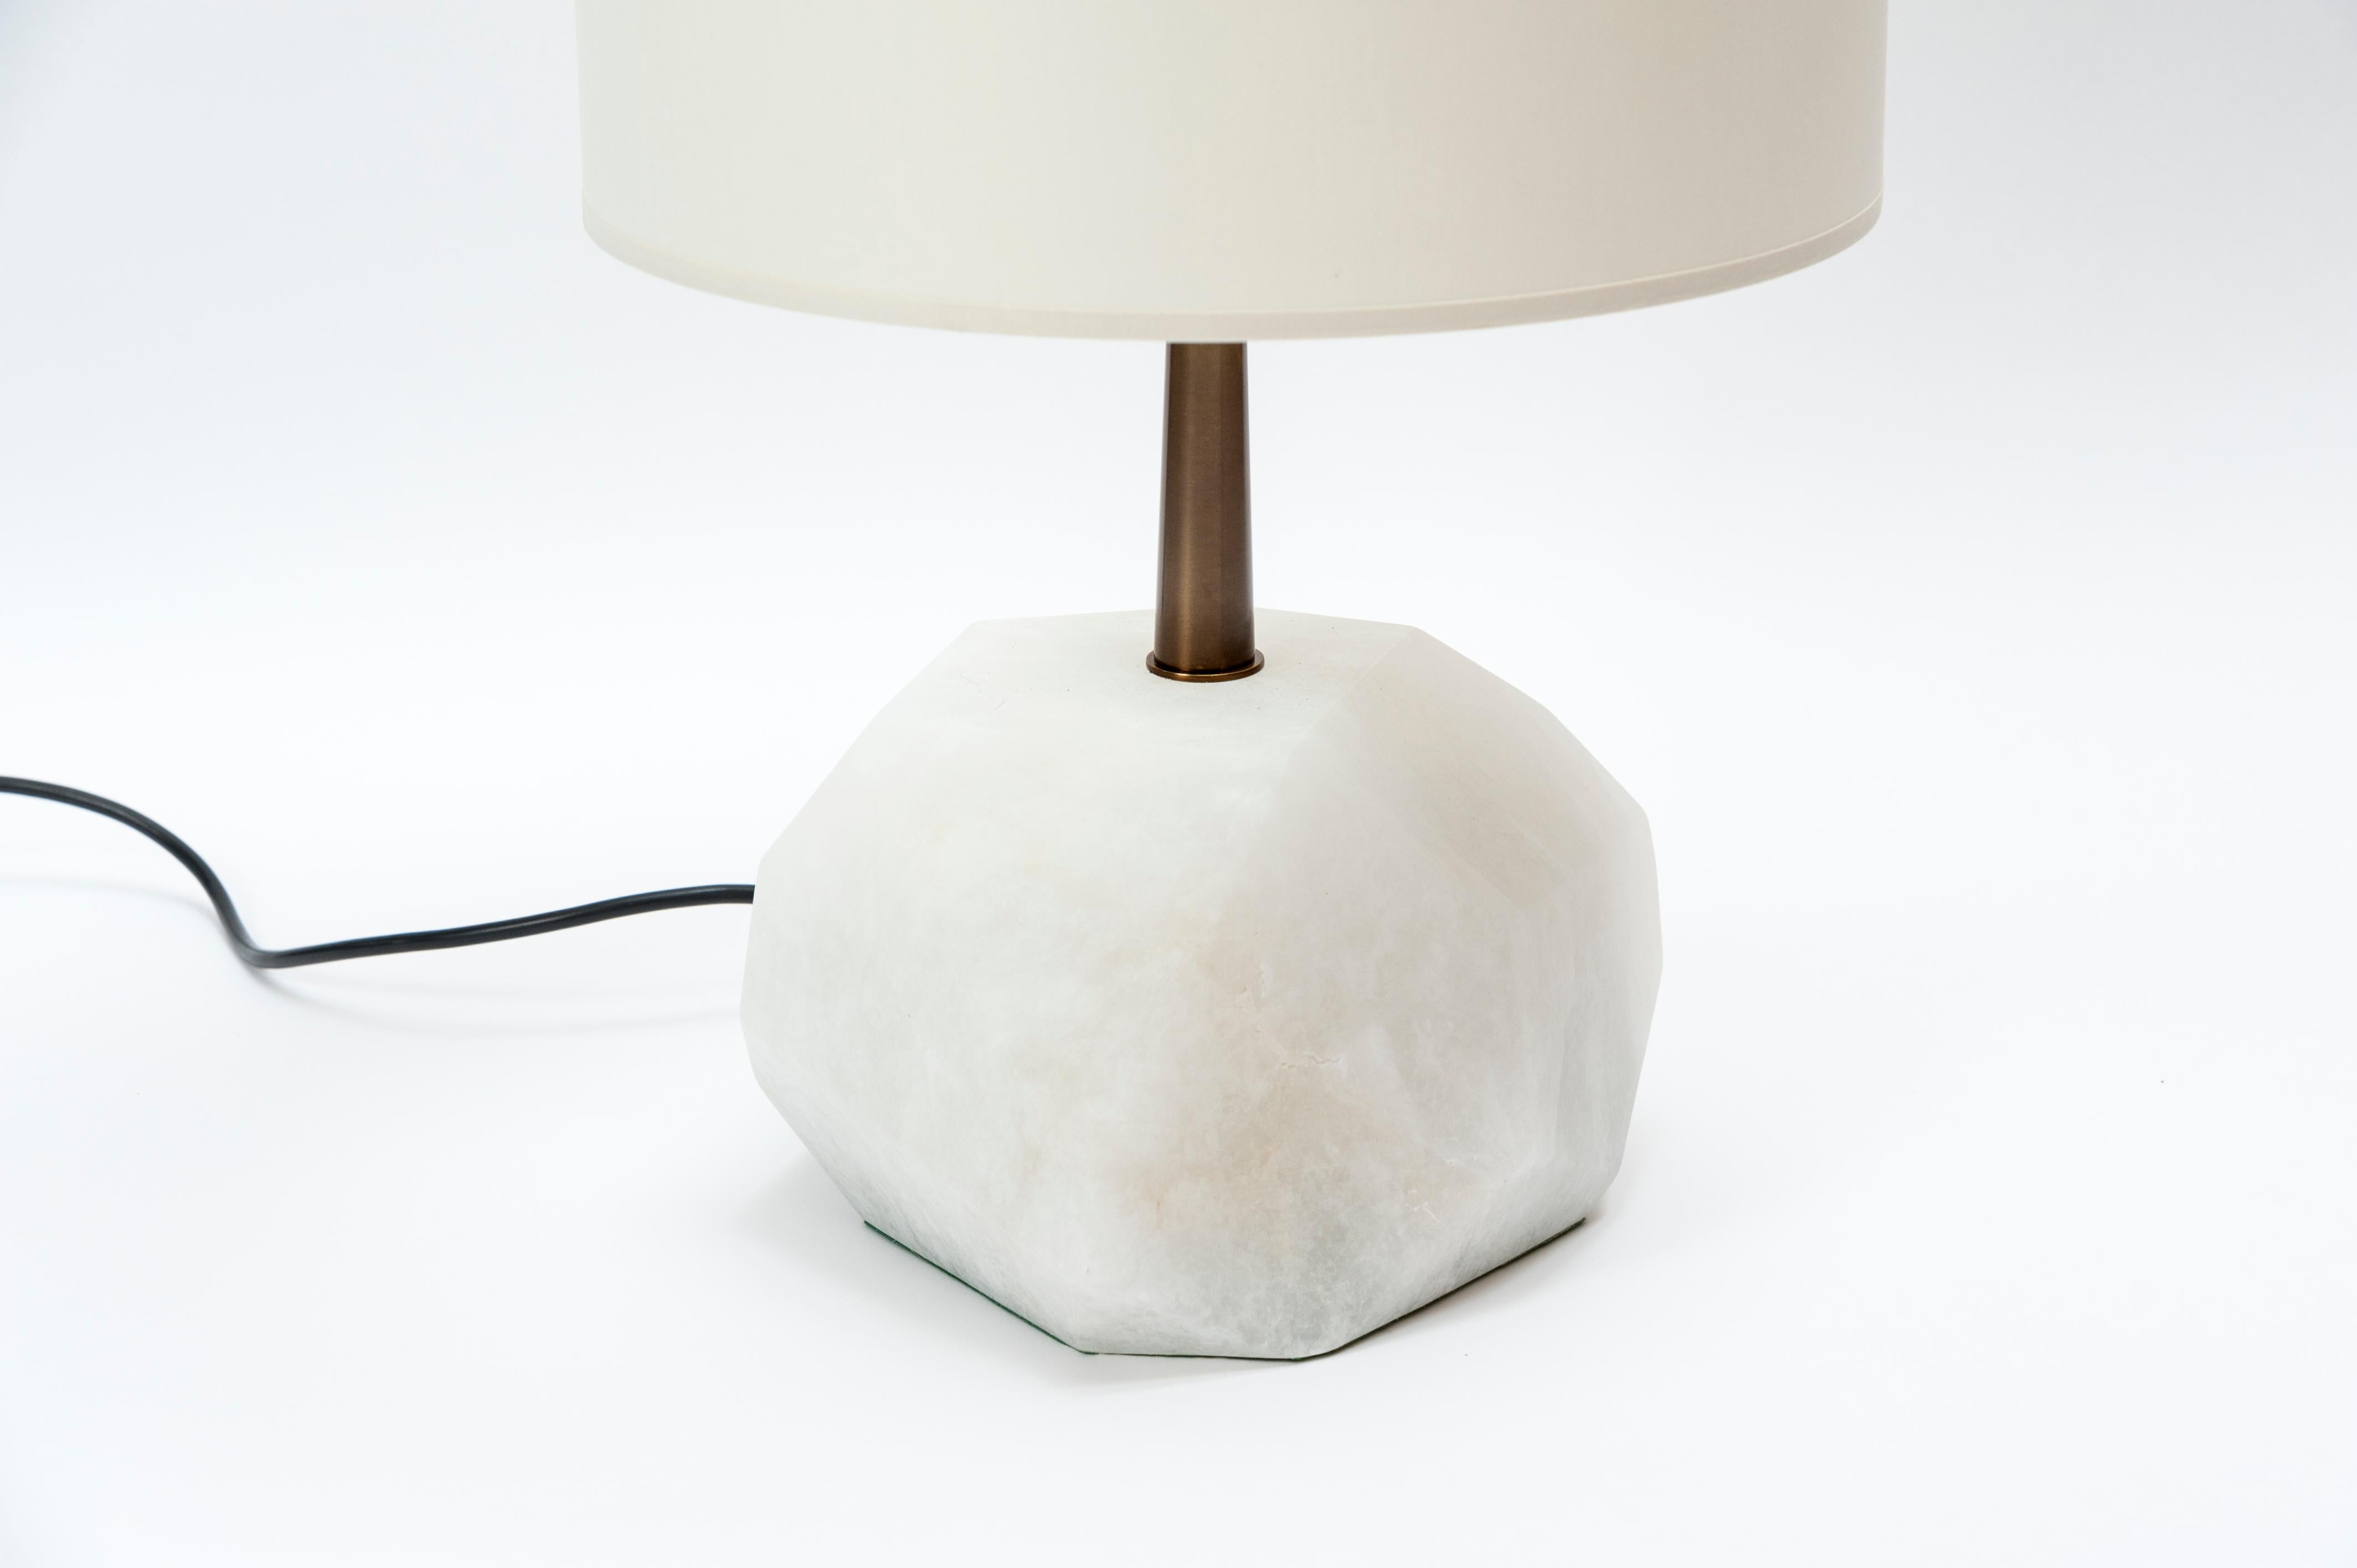 Creation table lamps by Glustin Luminaires.

Faceted block of alabaster topped with brass neck.

Light sources inside the alabaster and on top with independent switches.